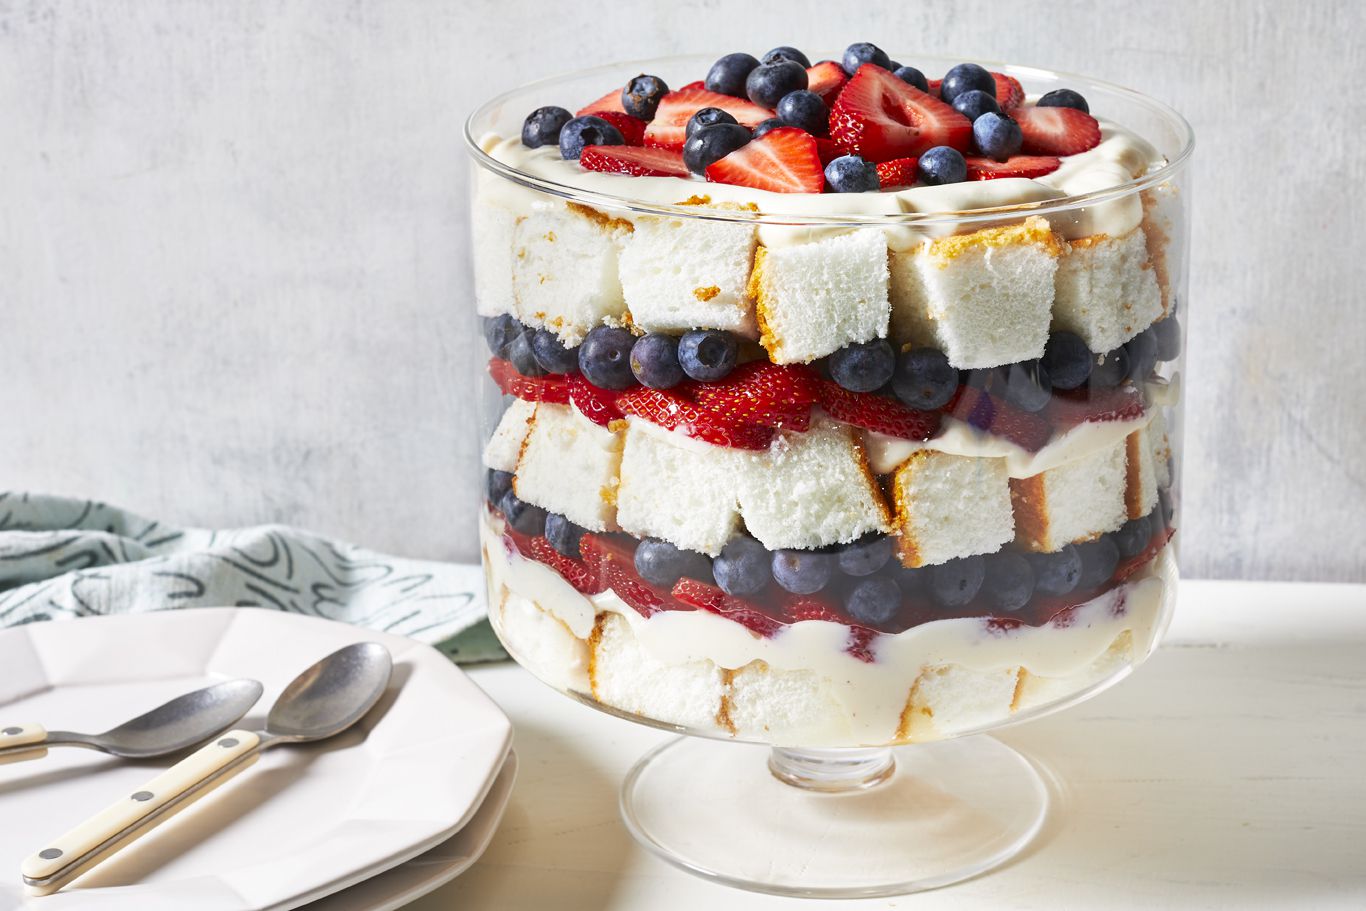 a gorgeous trifle layered with cake, fresh blueberries and fresh strawberries. stack of plates nearby for serving